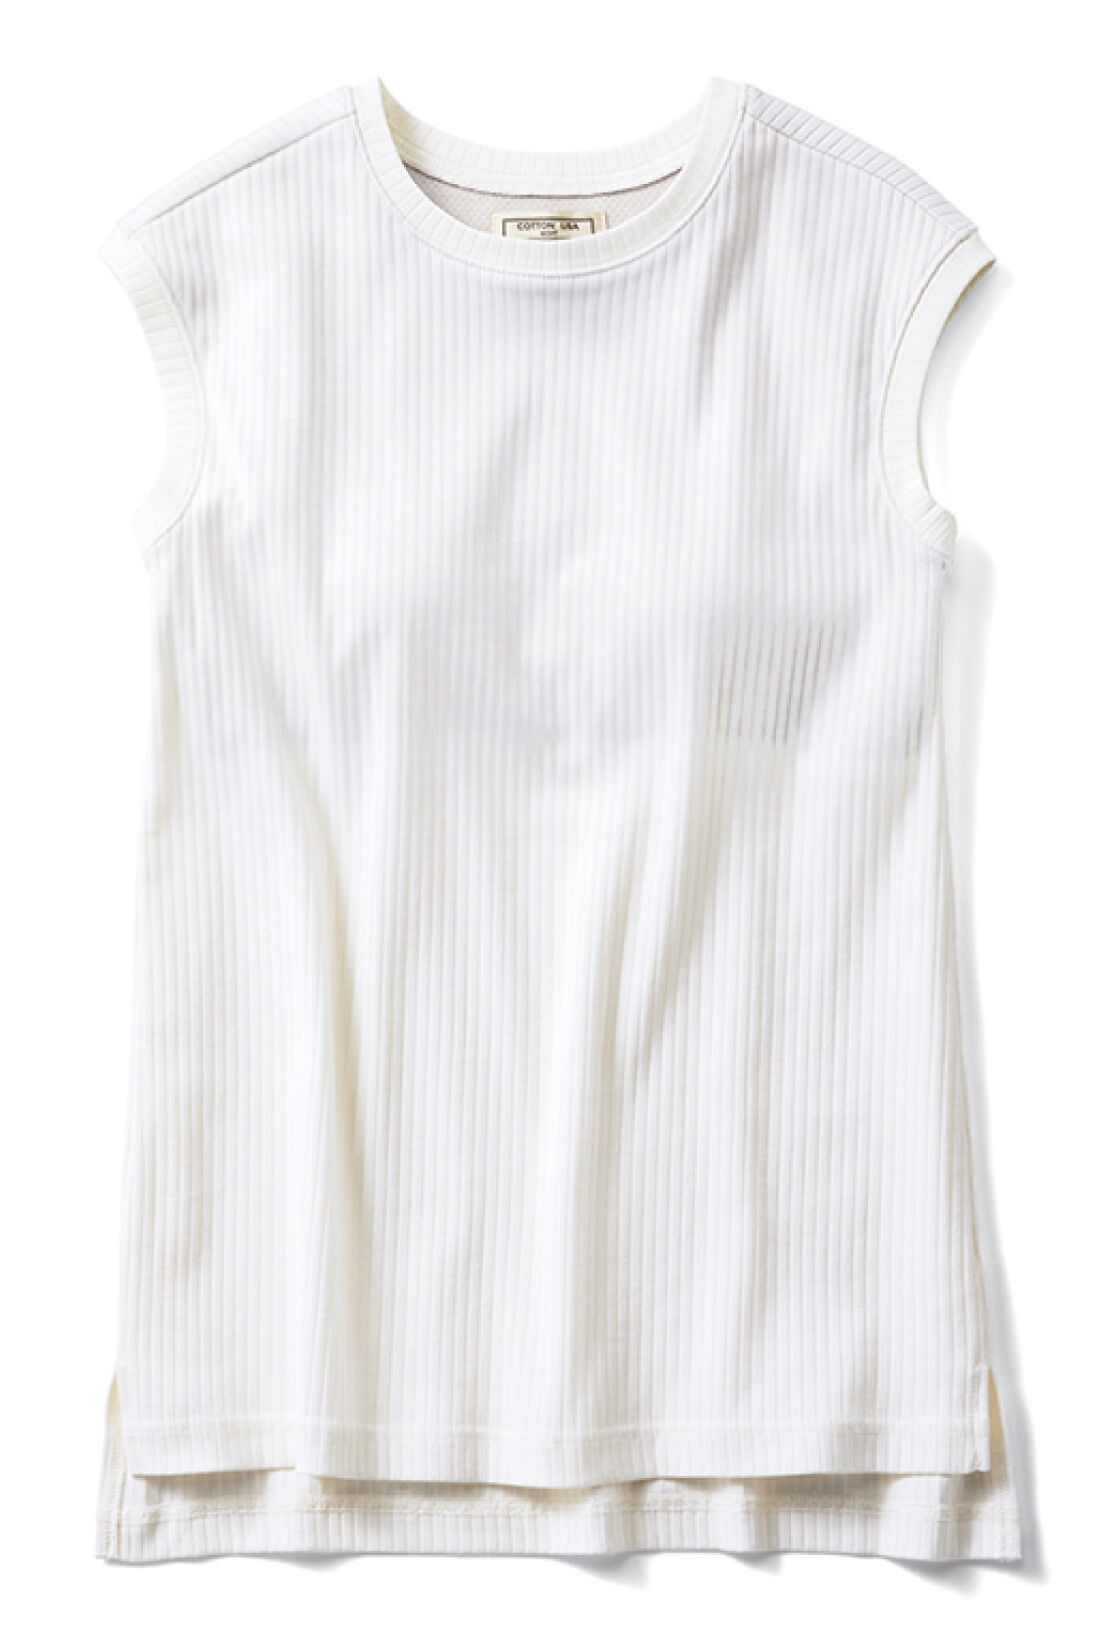 Cotton On ribbed scoop neck long sleeve top in white